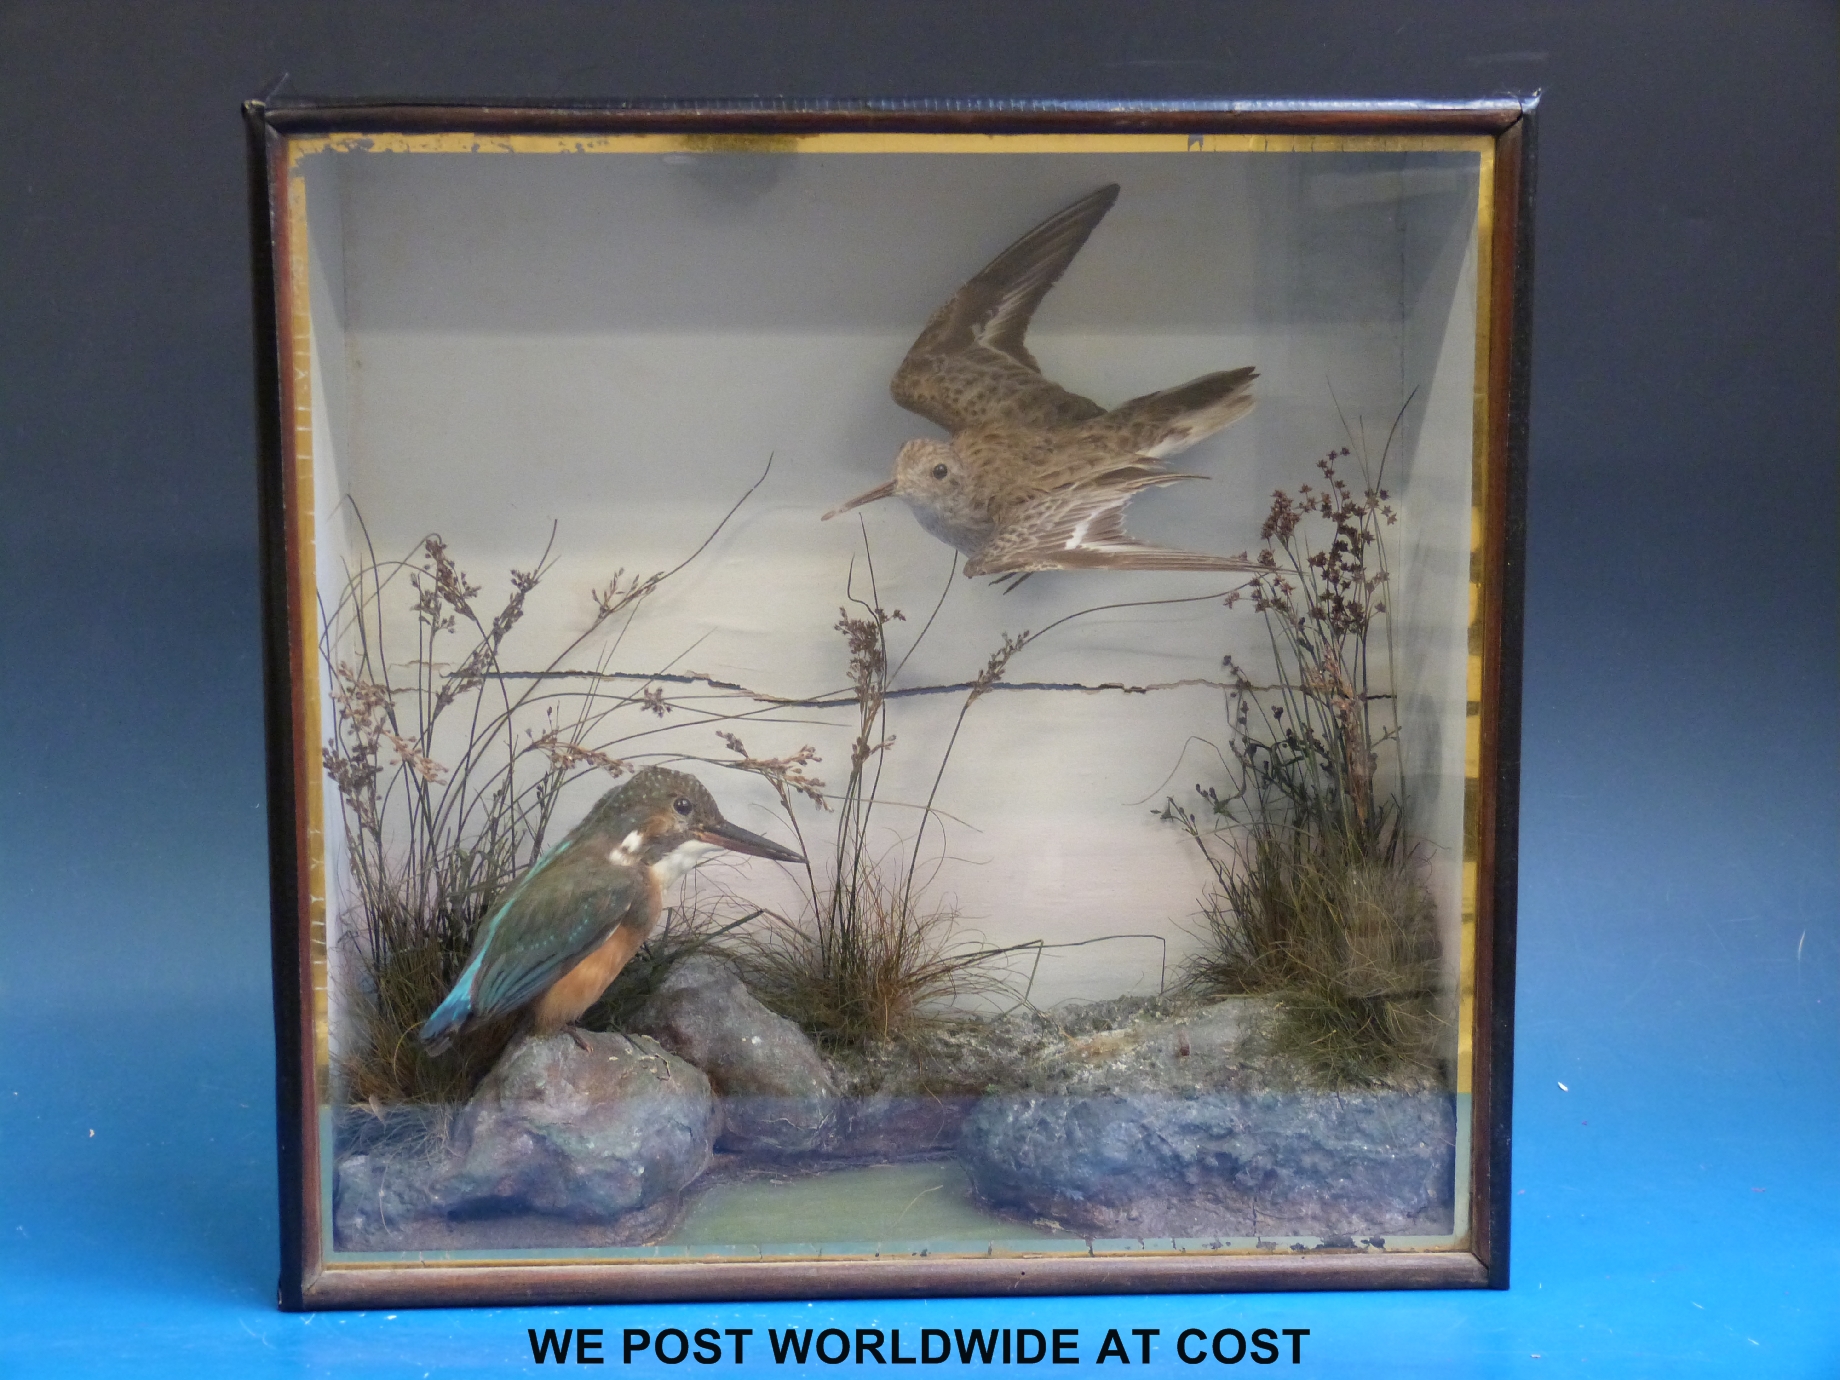 A taxidermy study of a kingfisher and a sandpiper in a naturalistic setting